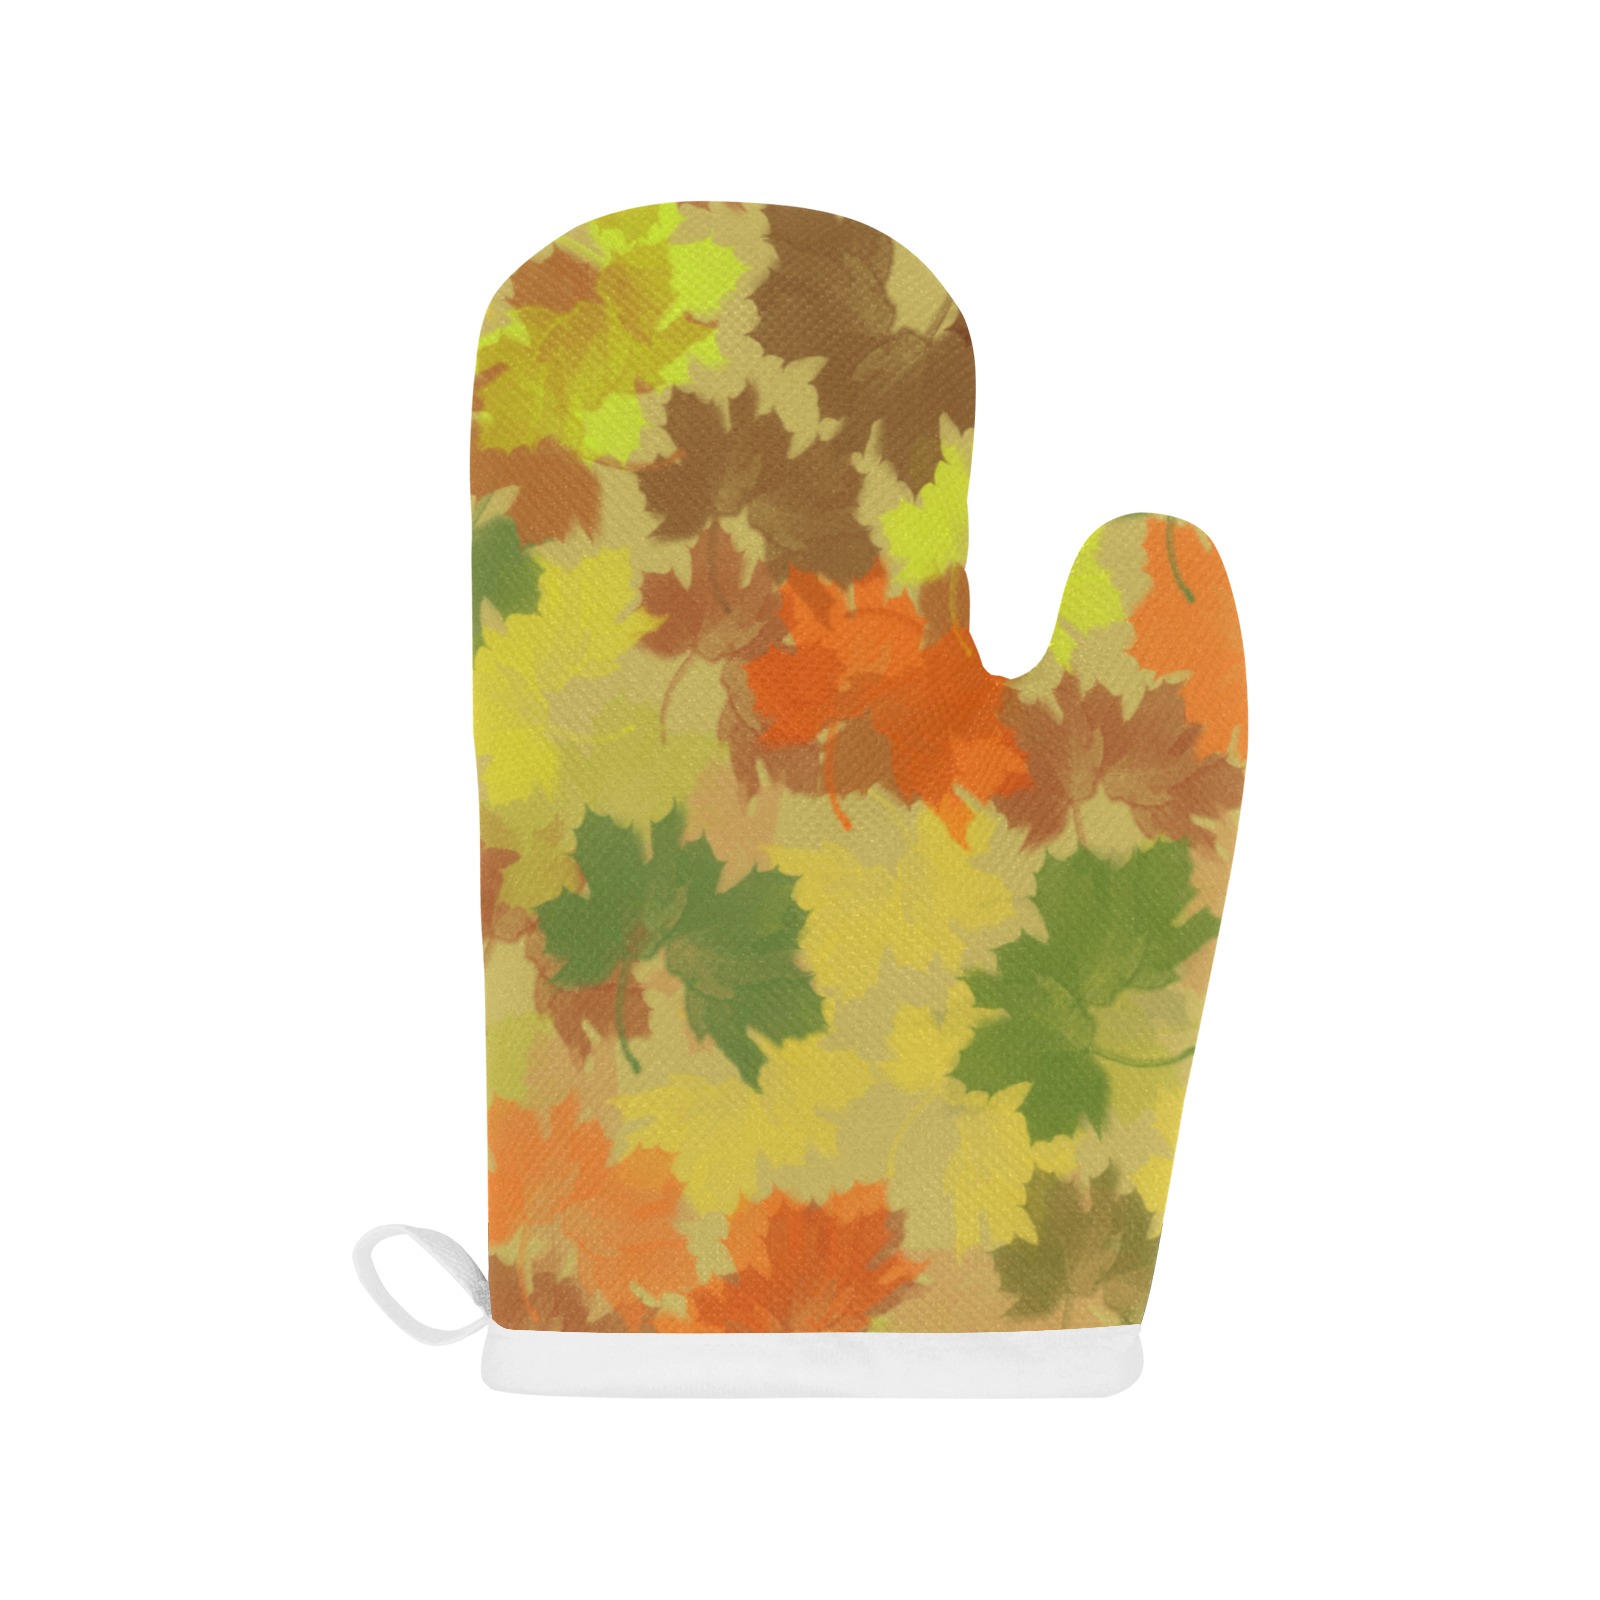 Autumn Leaves / Fall Leaves Linen Oven Mitt (Two Pieces)